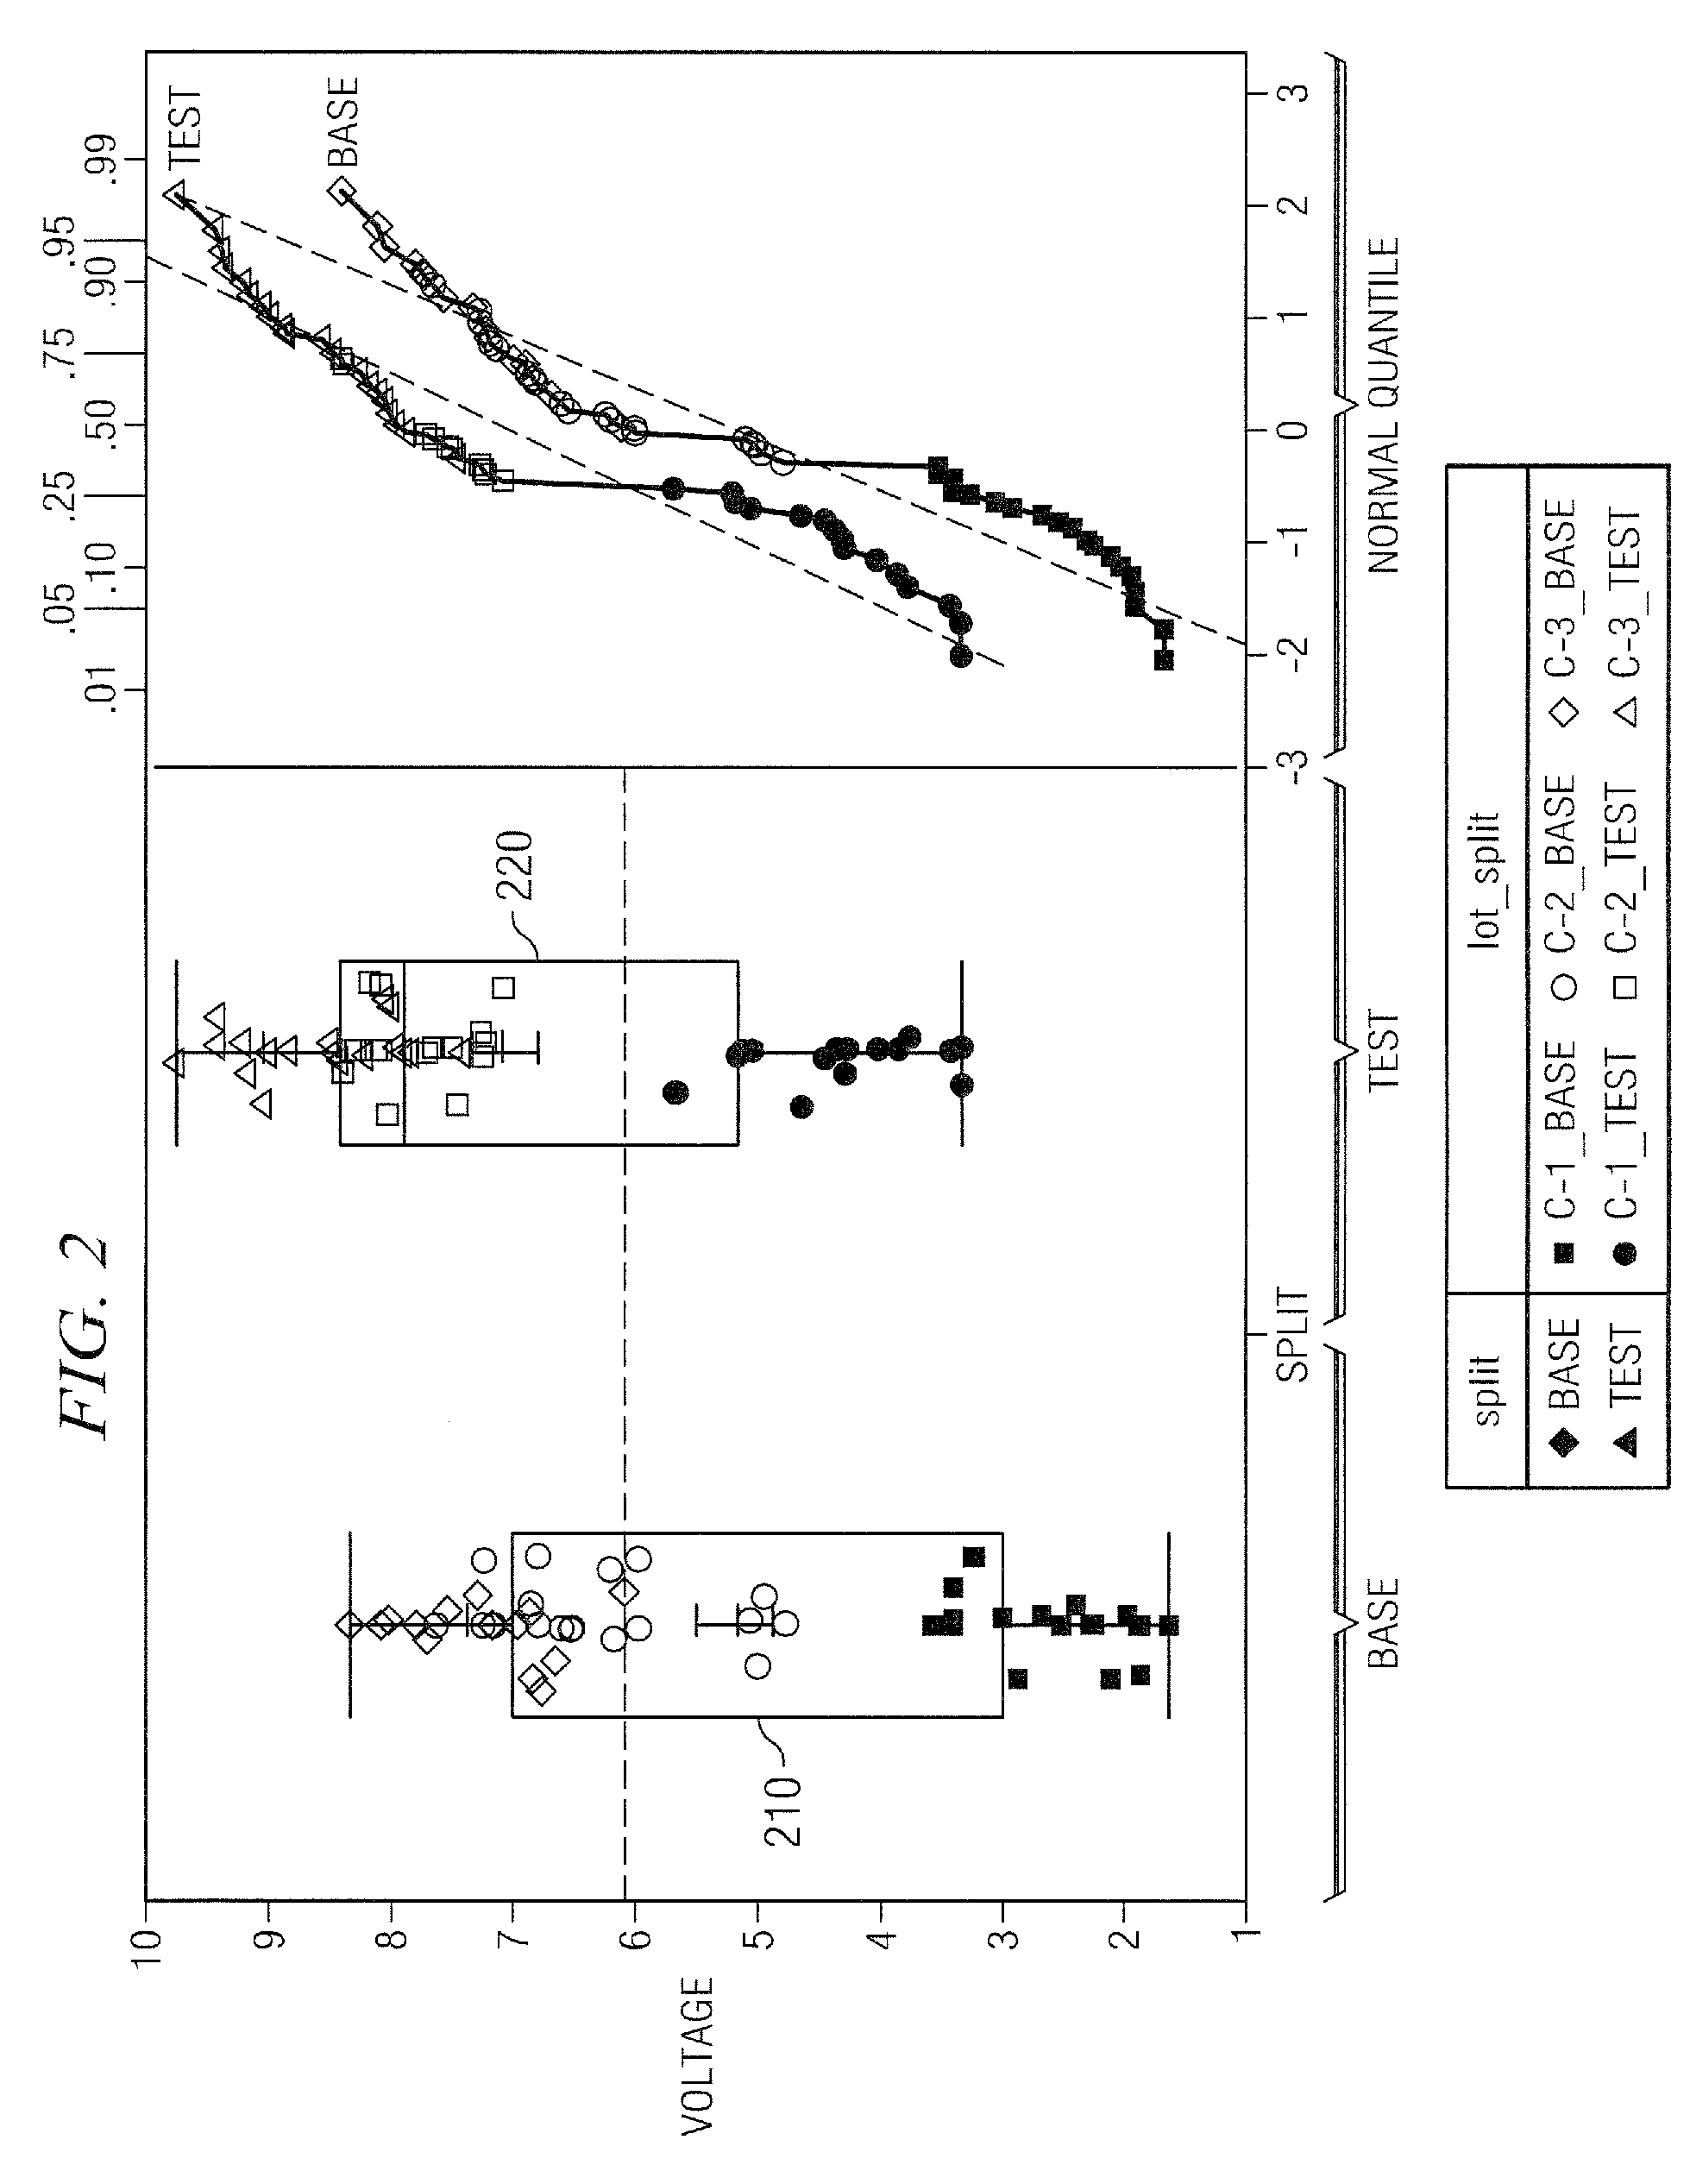 Methods of analyzing integrated circuit equivalency and manufacturing an integrated circuit